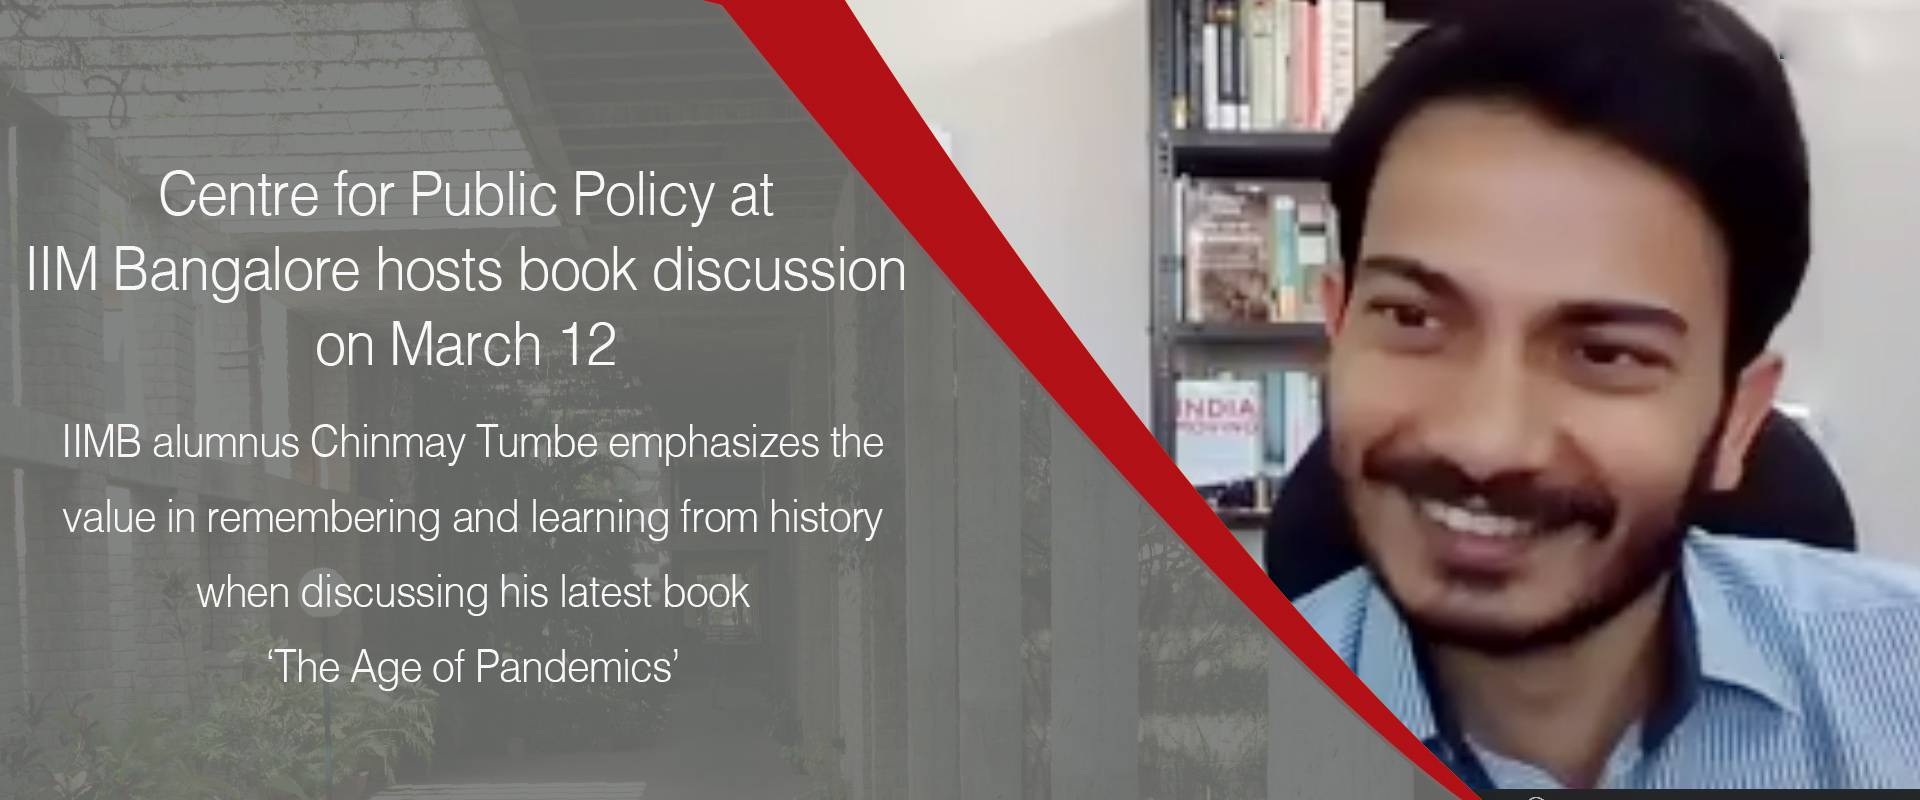 Centre for Public Policy at IIM Bangalore hosts book discussion on March 12